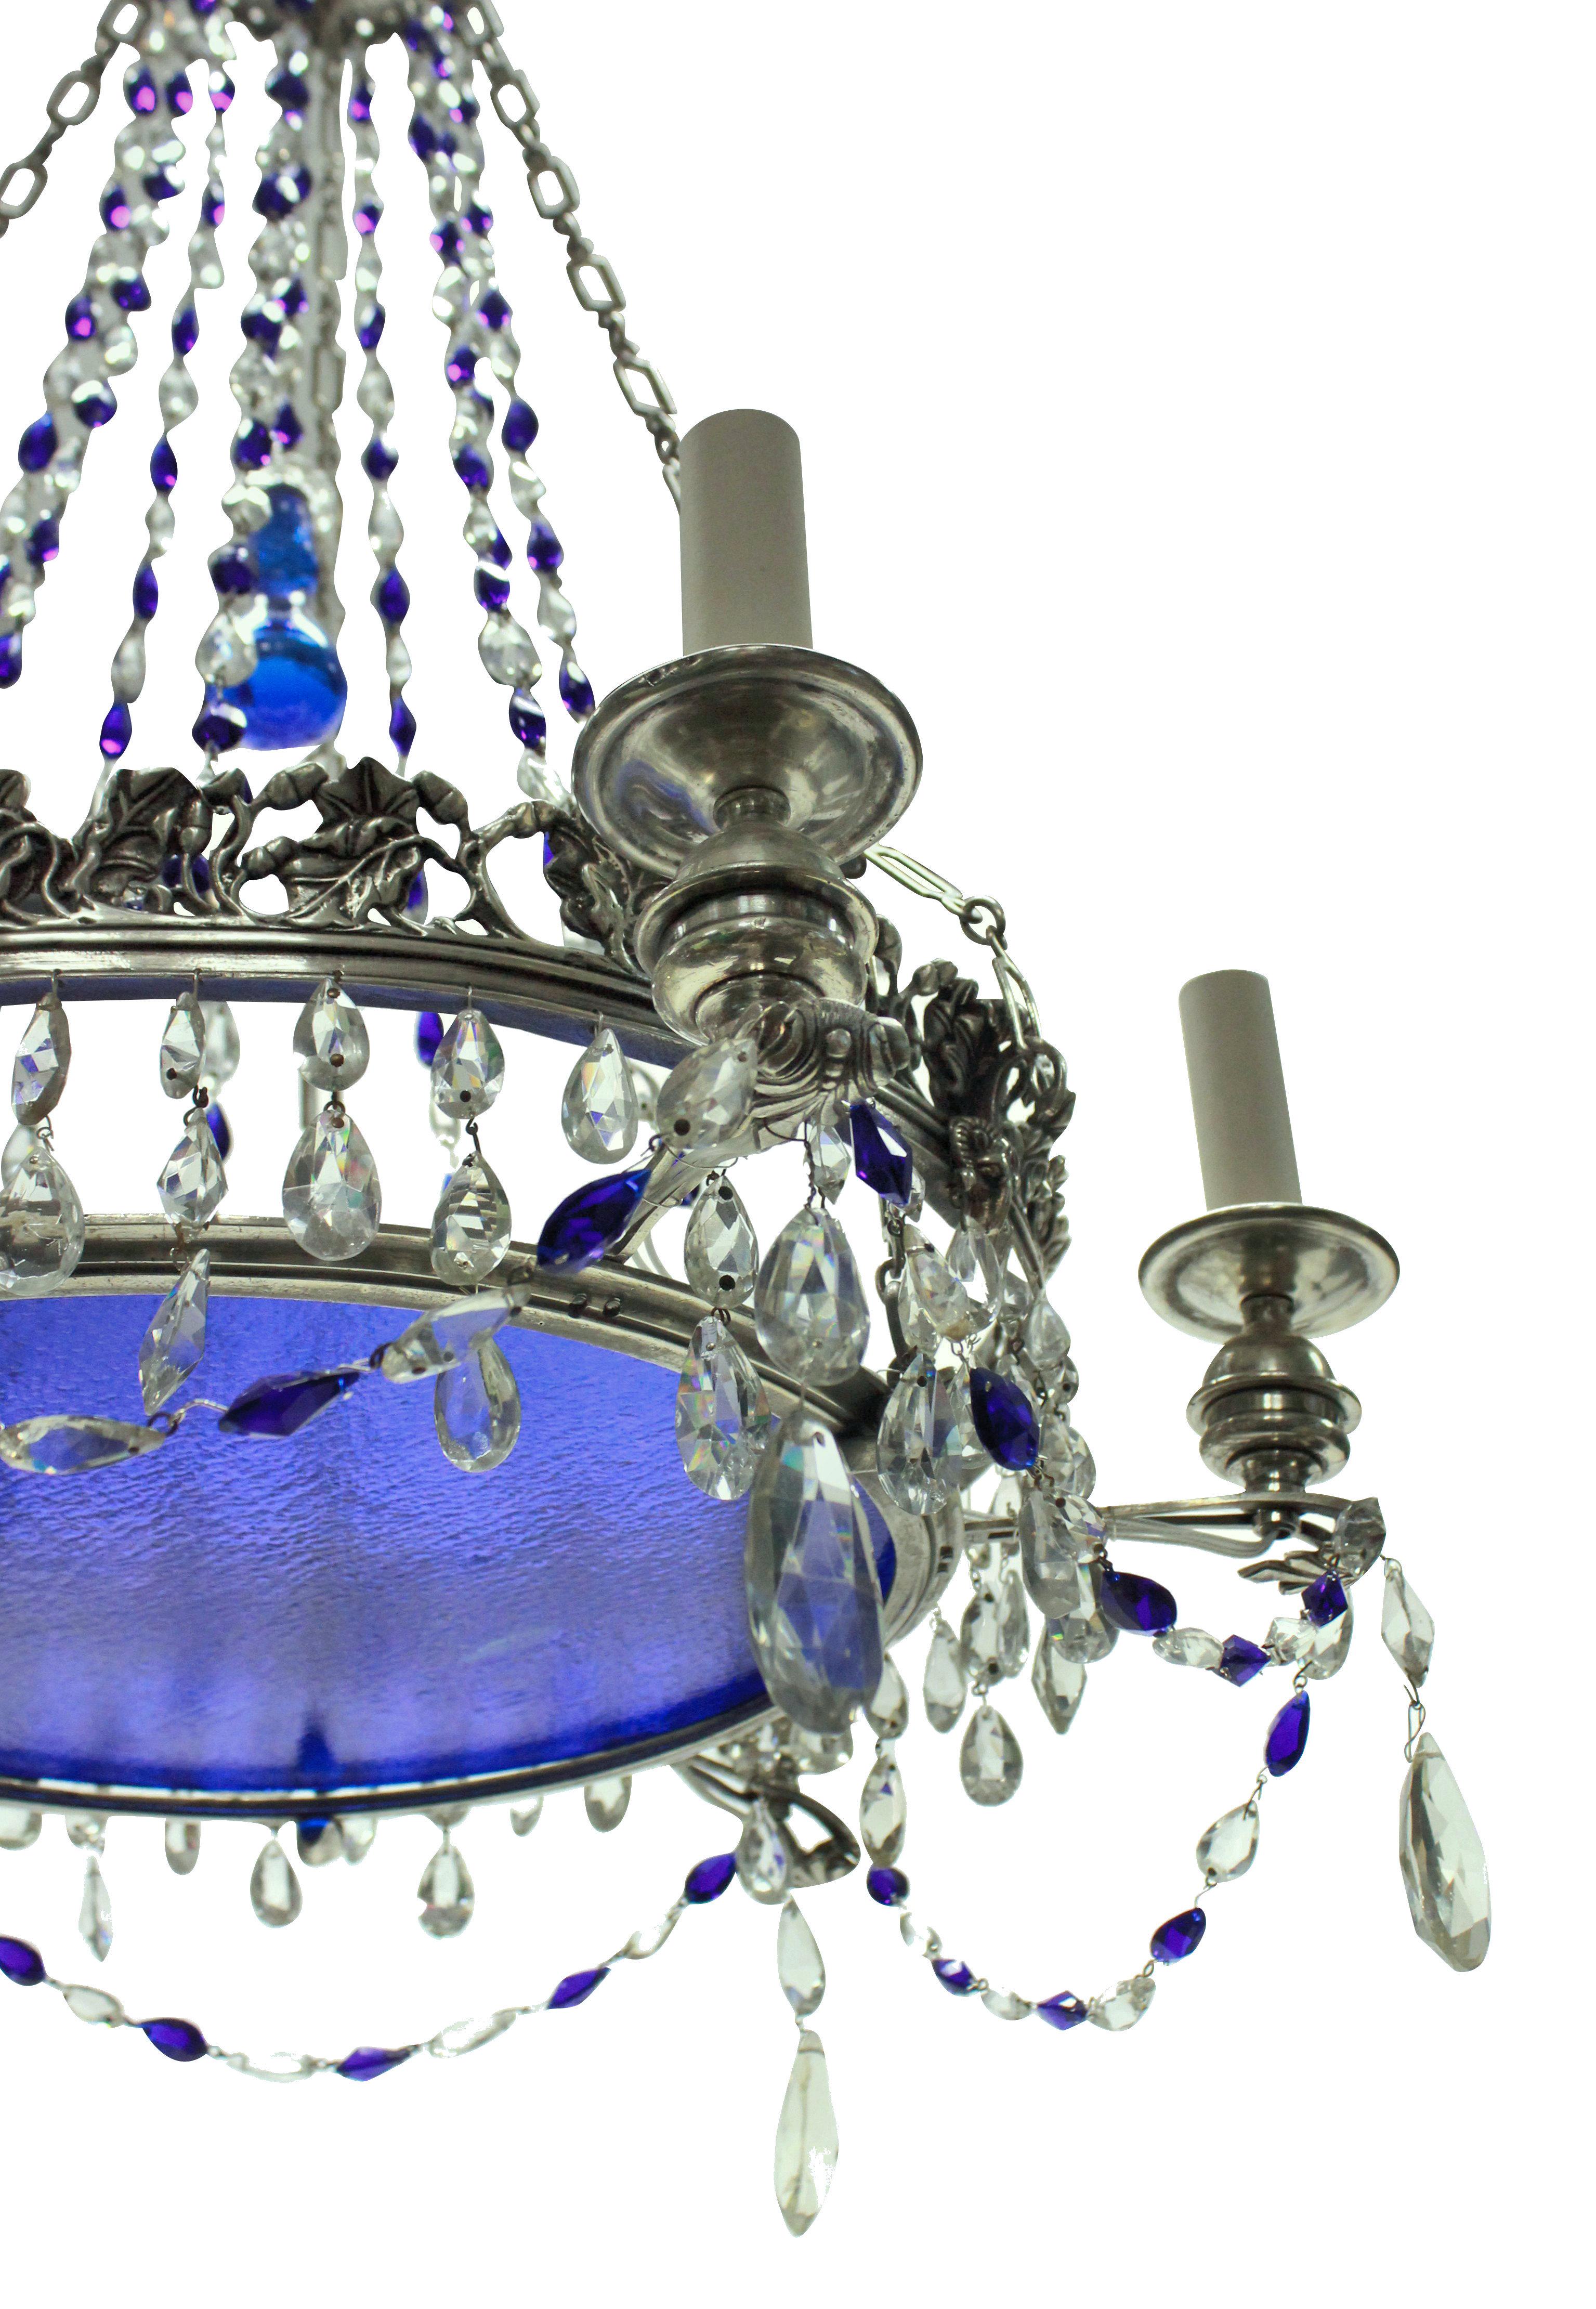 A charming 19th Century Russian chandelier in plated silver with good quality cut glass drops, blue glass details and plate, suspended by silver chain.